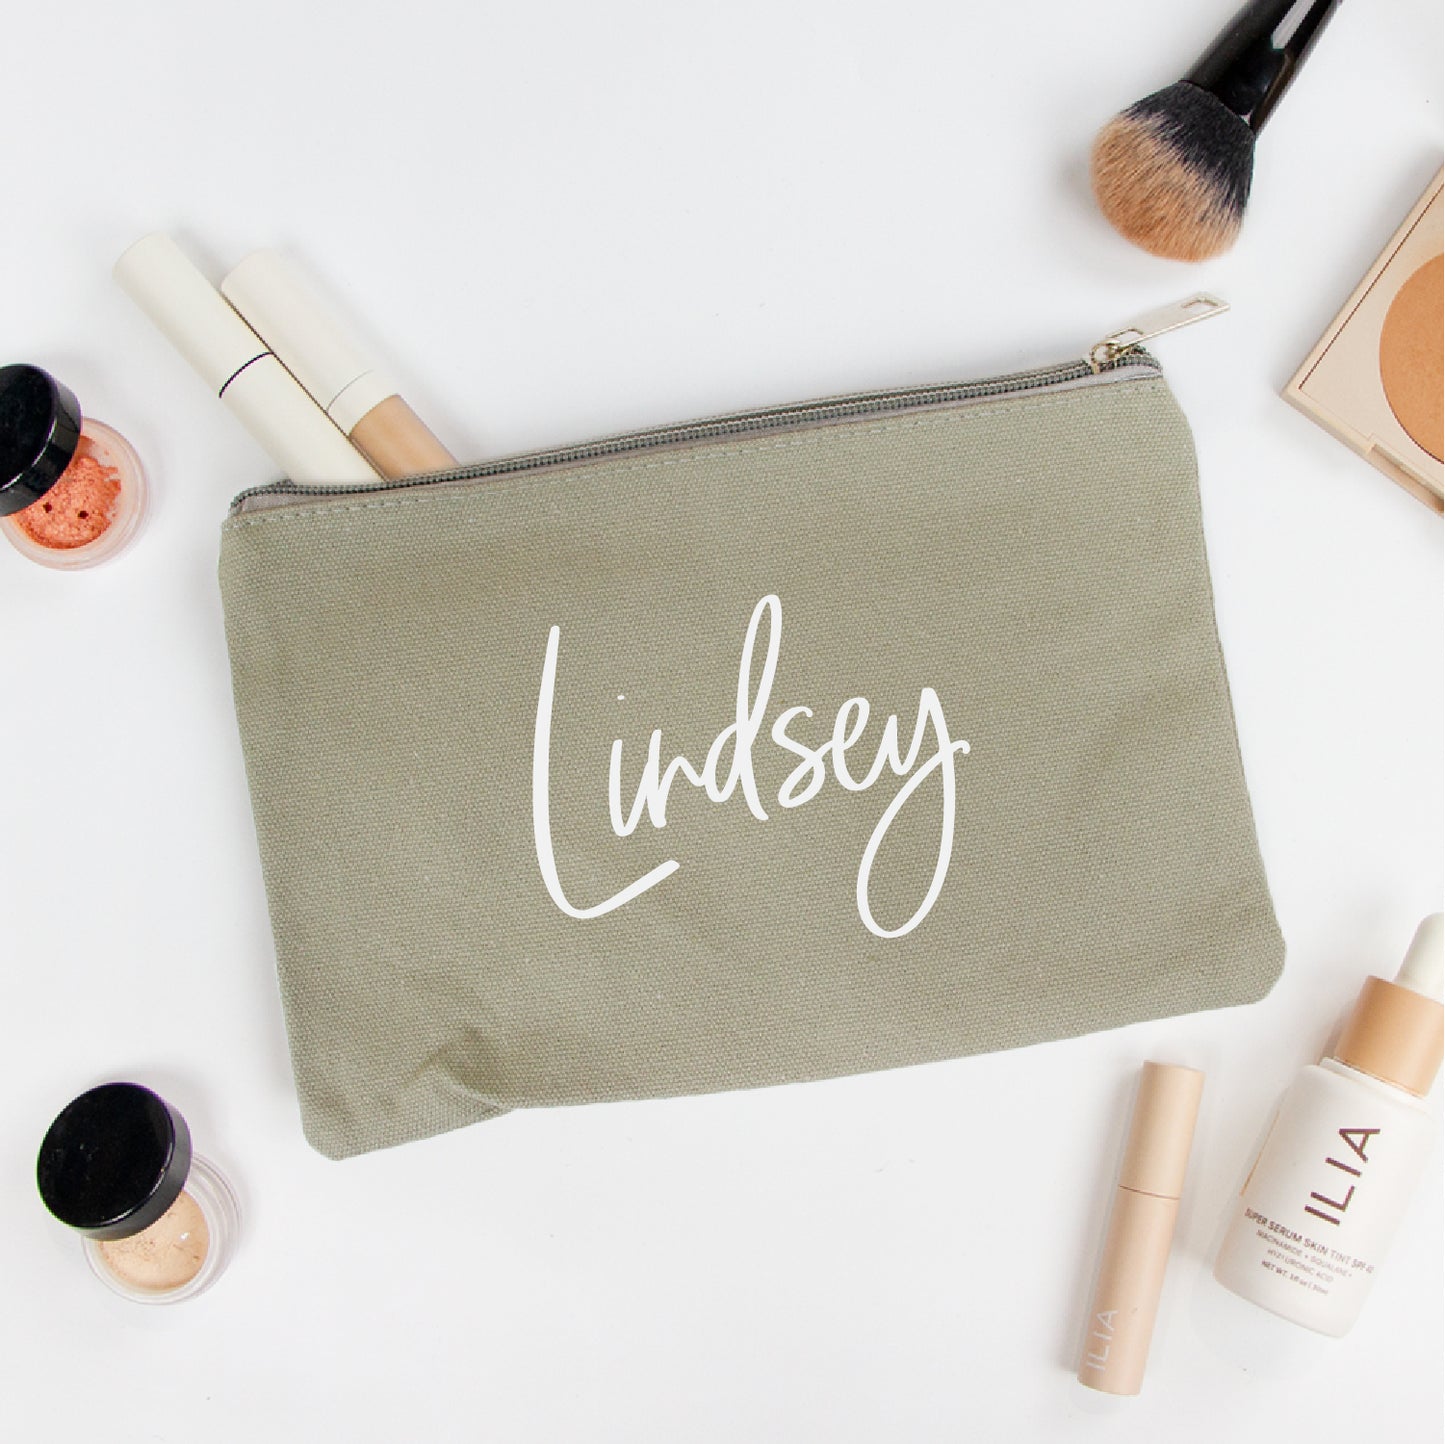 Personalized Name Canvas Makeup Bag Gifts